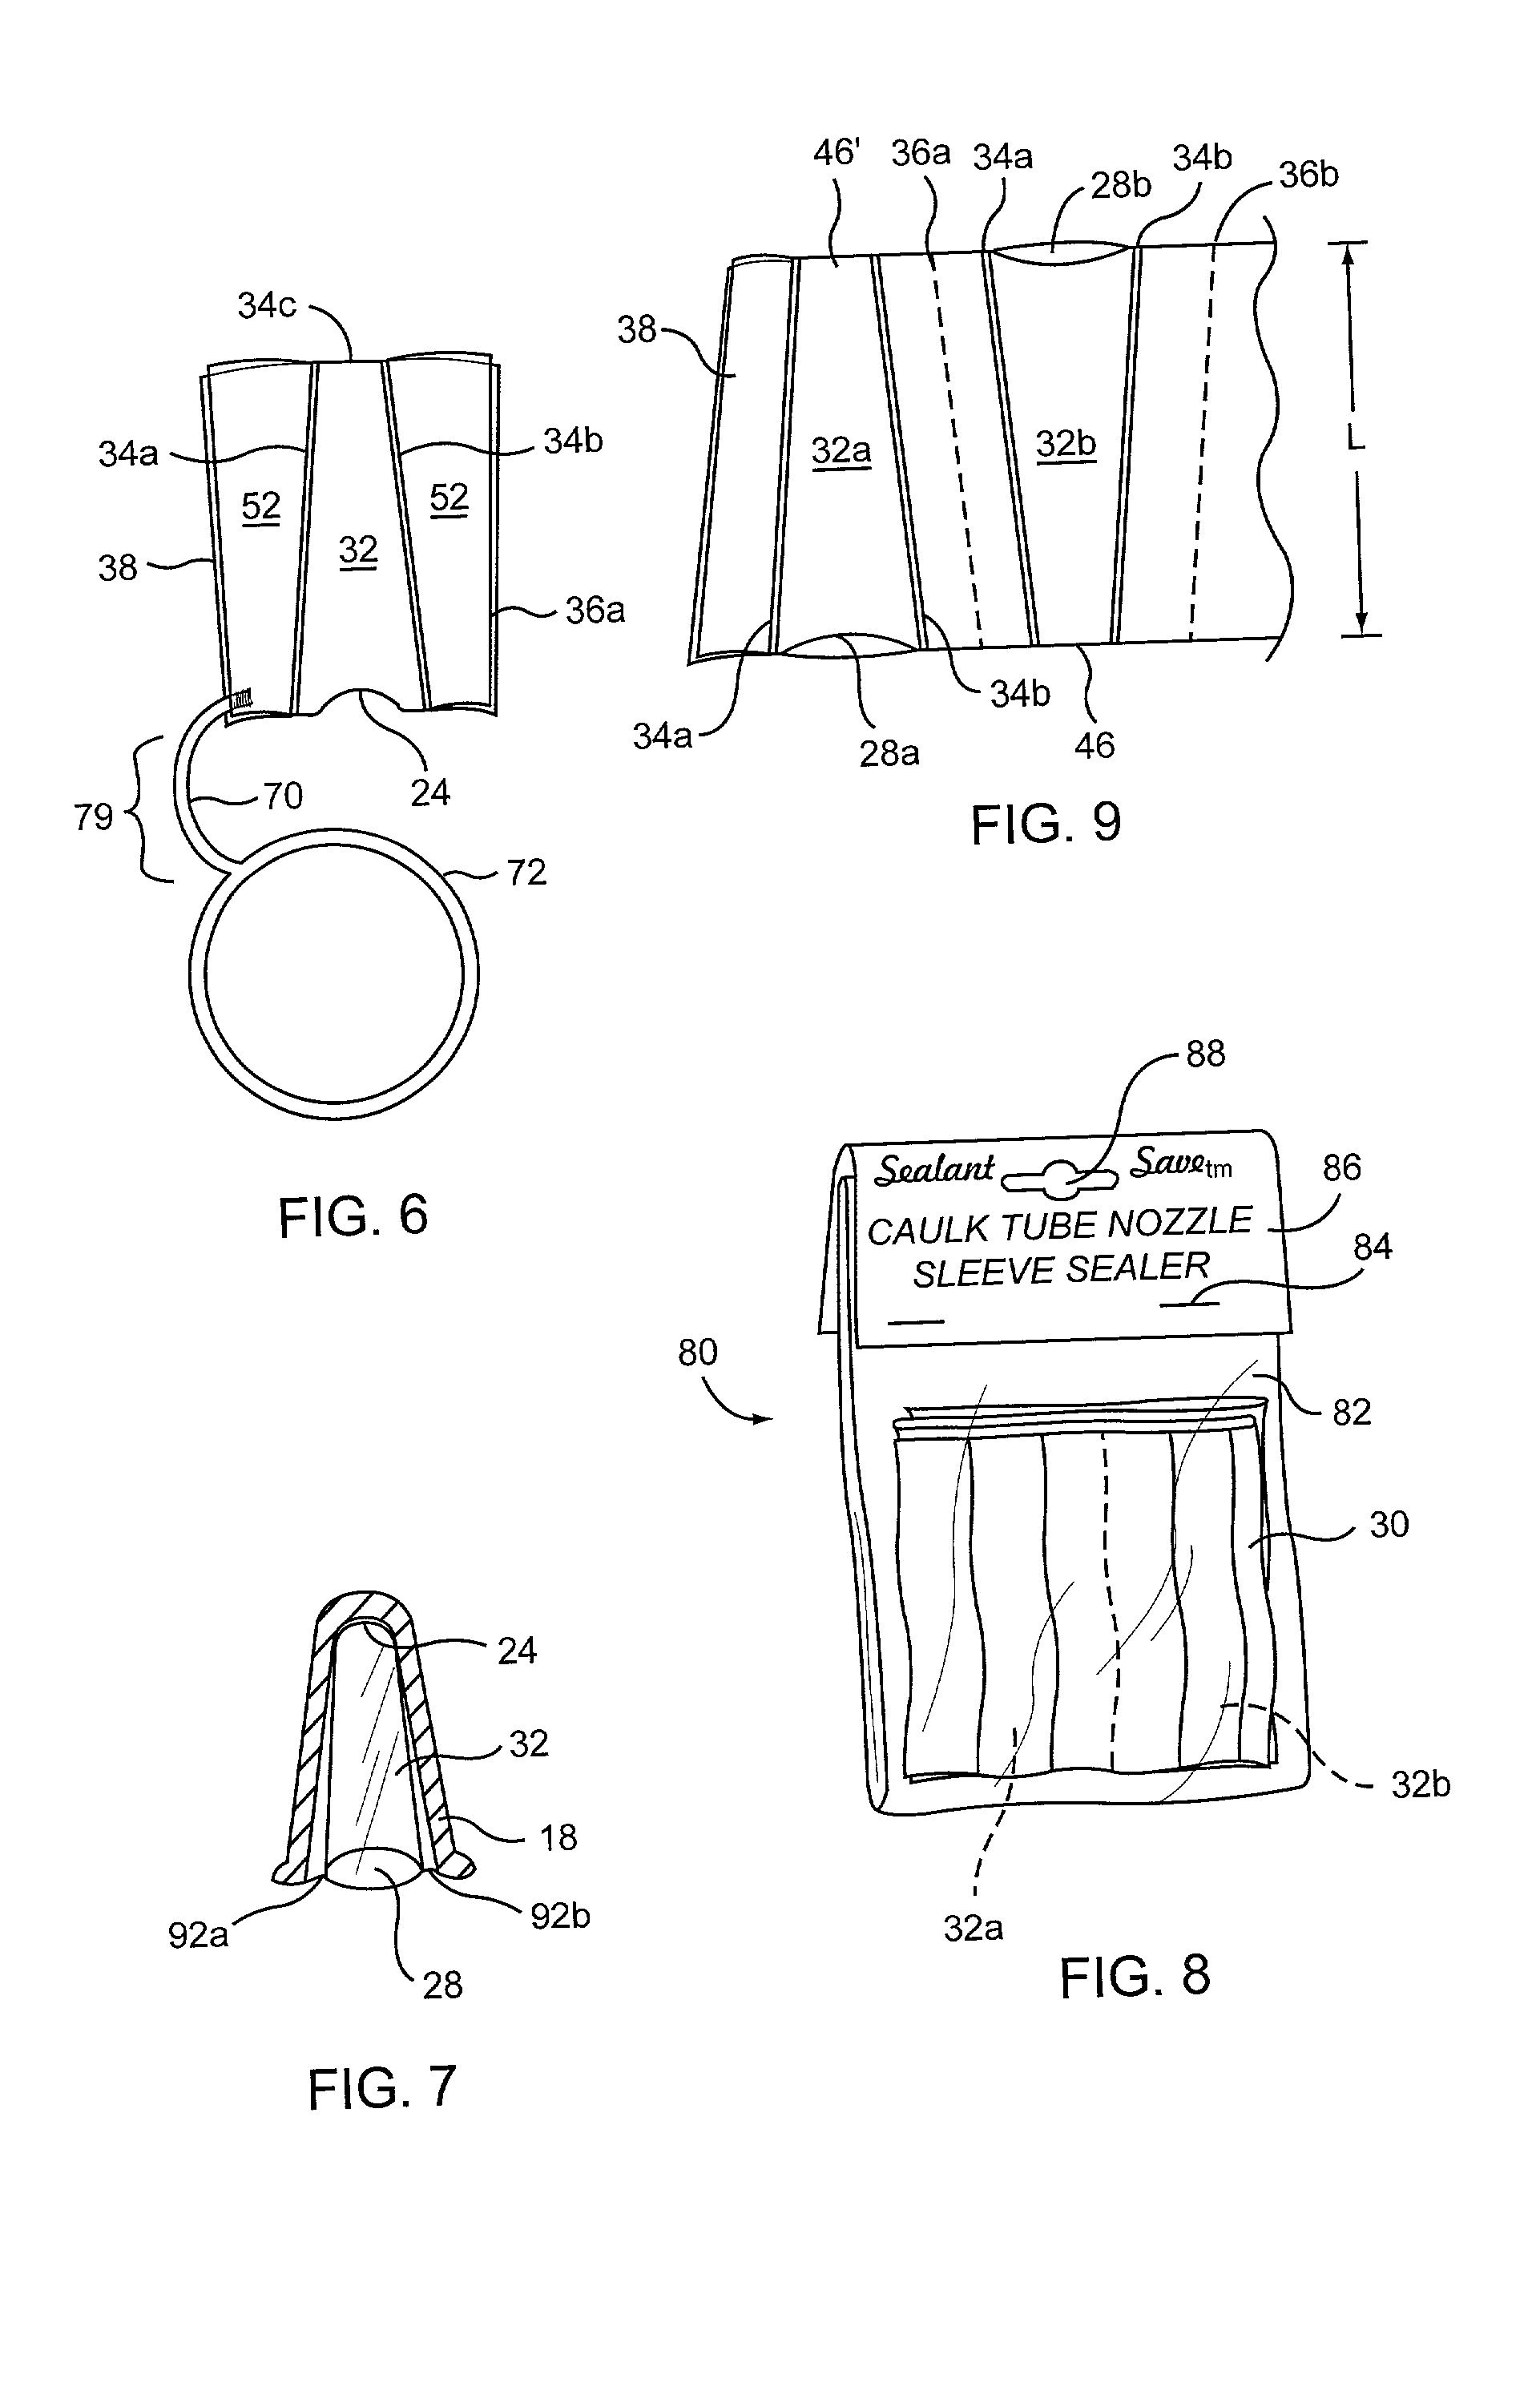 Sleeve-type closures for dispenser nozzles